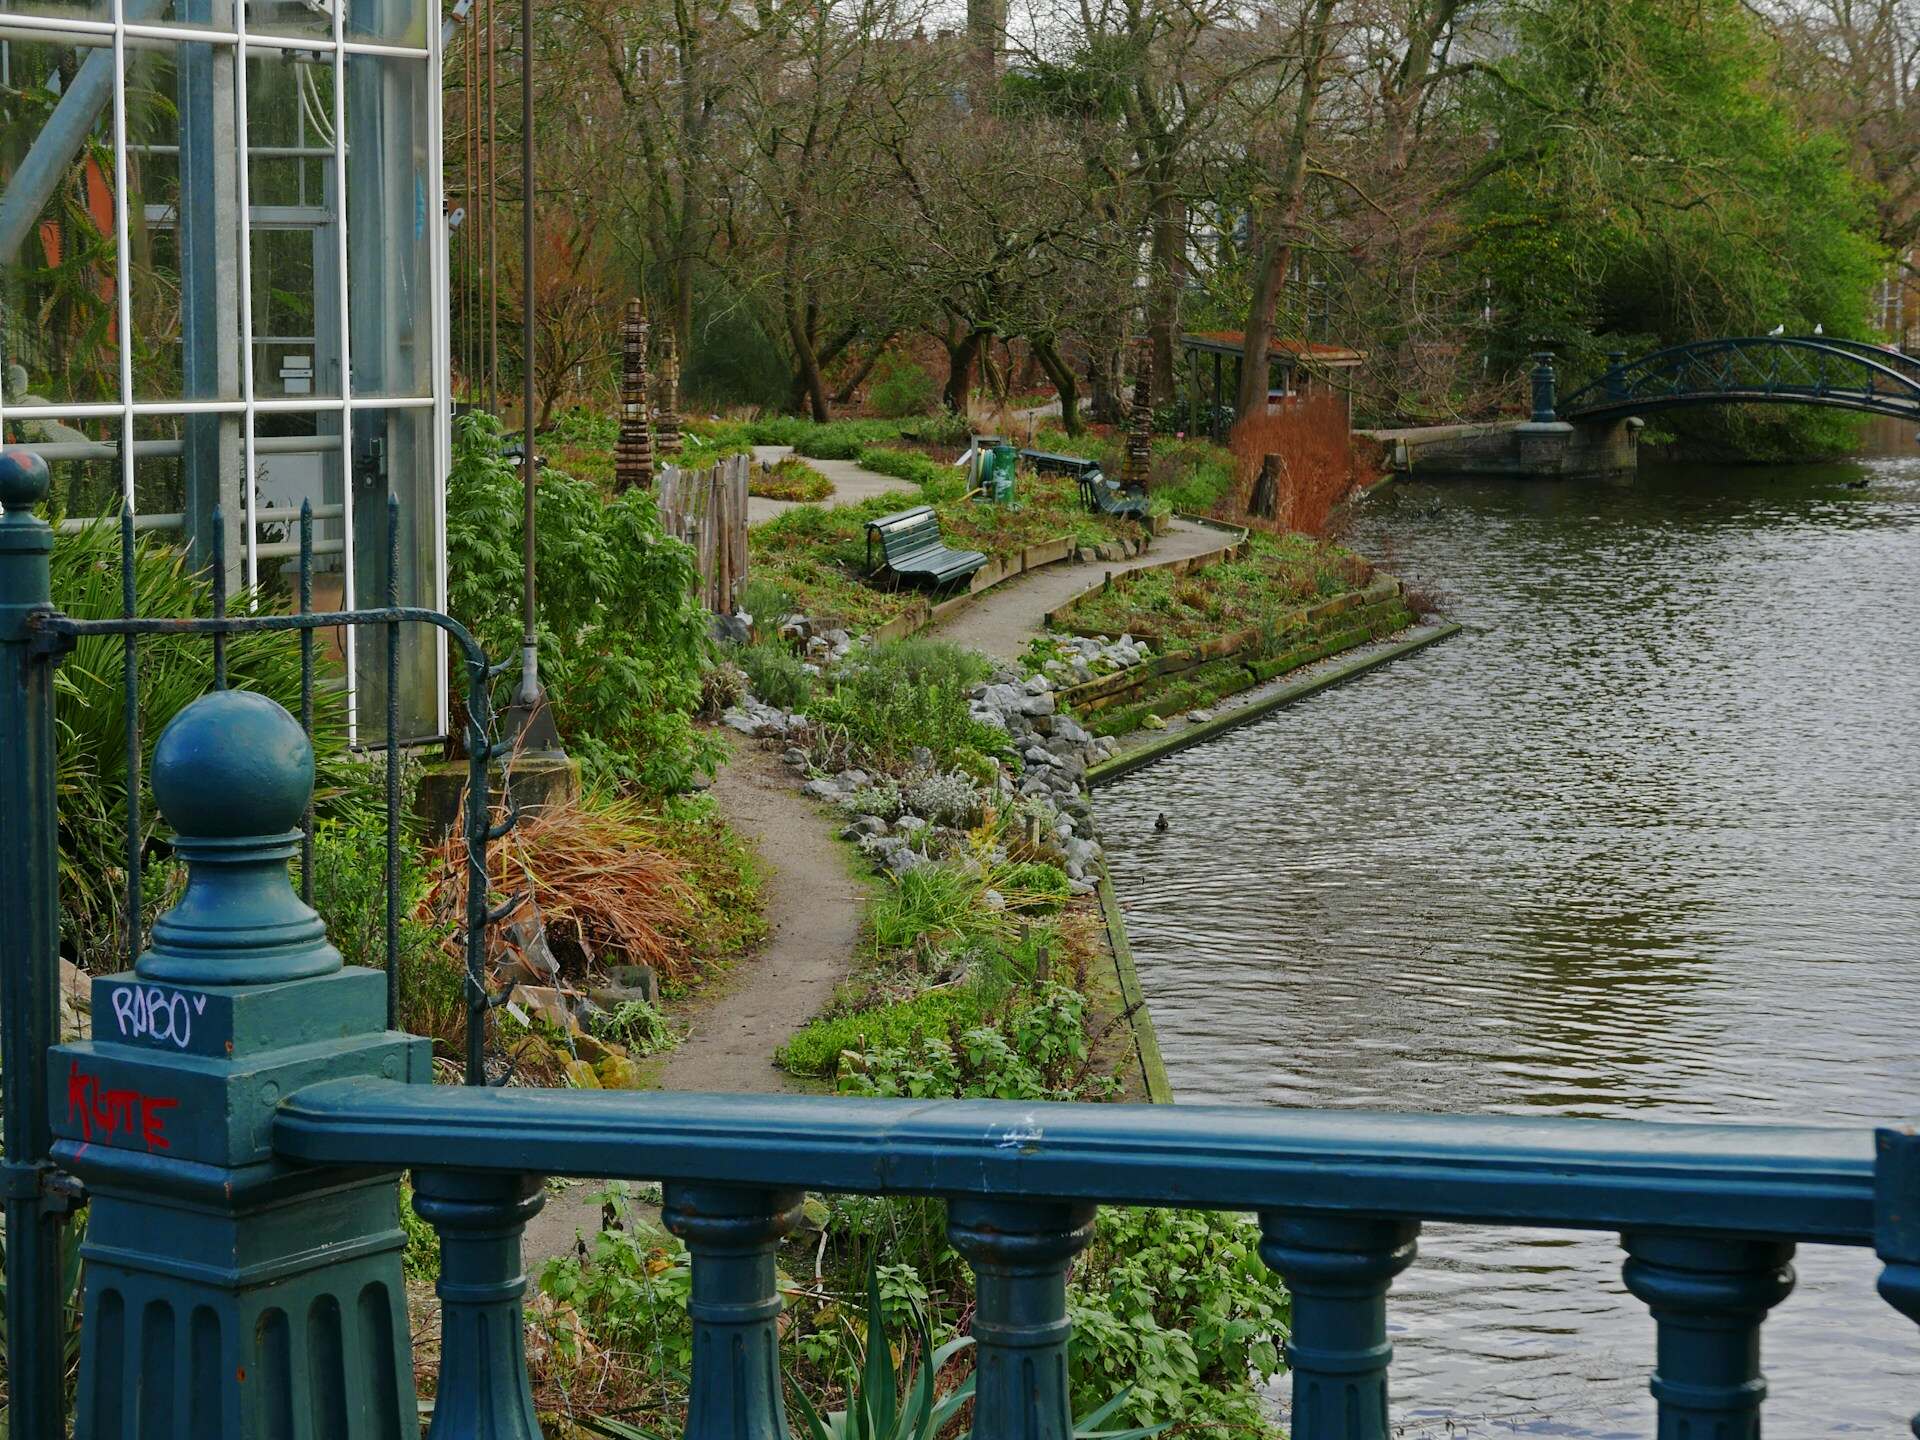 The lush and diverse Hortus Botanicus in Amsterdam, featuring the Palm House and vibrant plant collections.